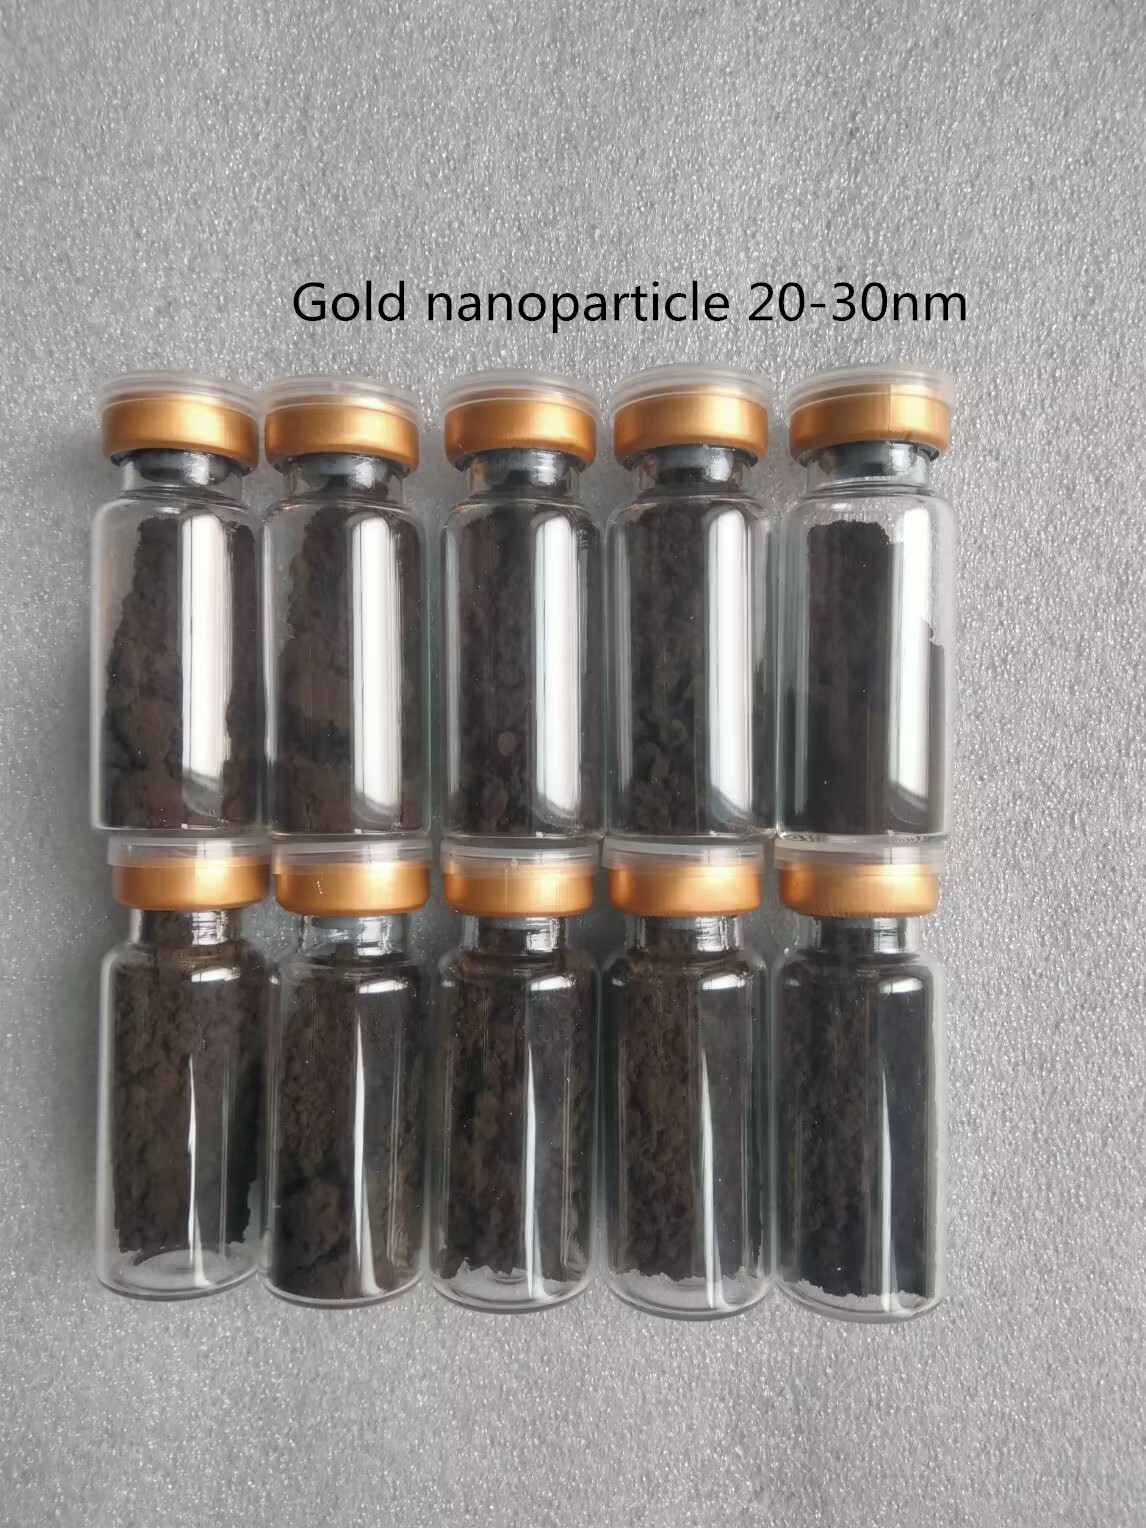 Is it Time to Invest in Nanoscale Gold Powder as Gold Price Surges?